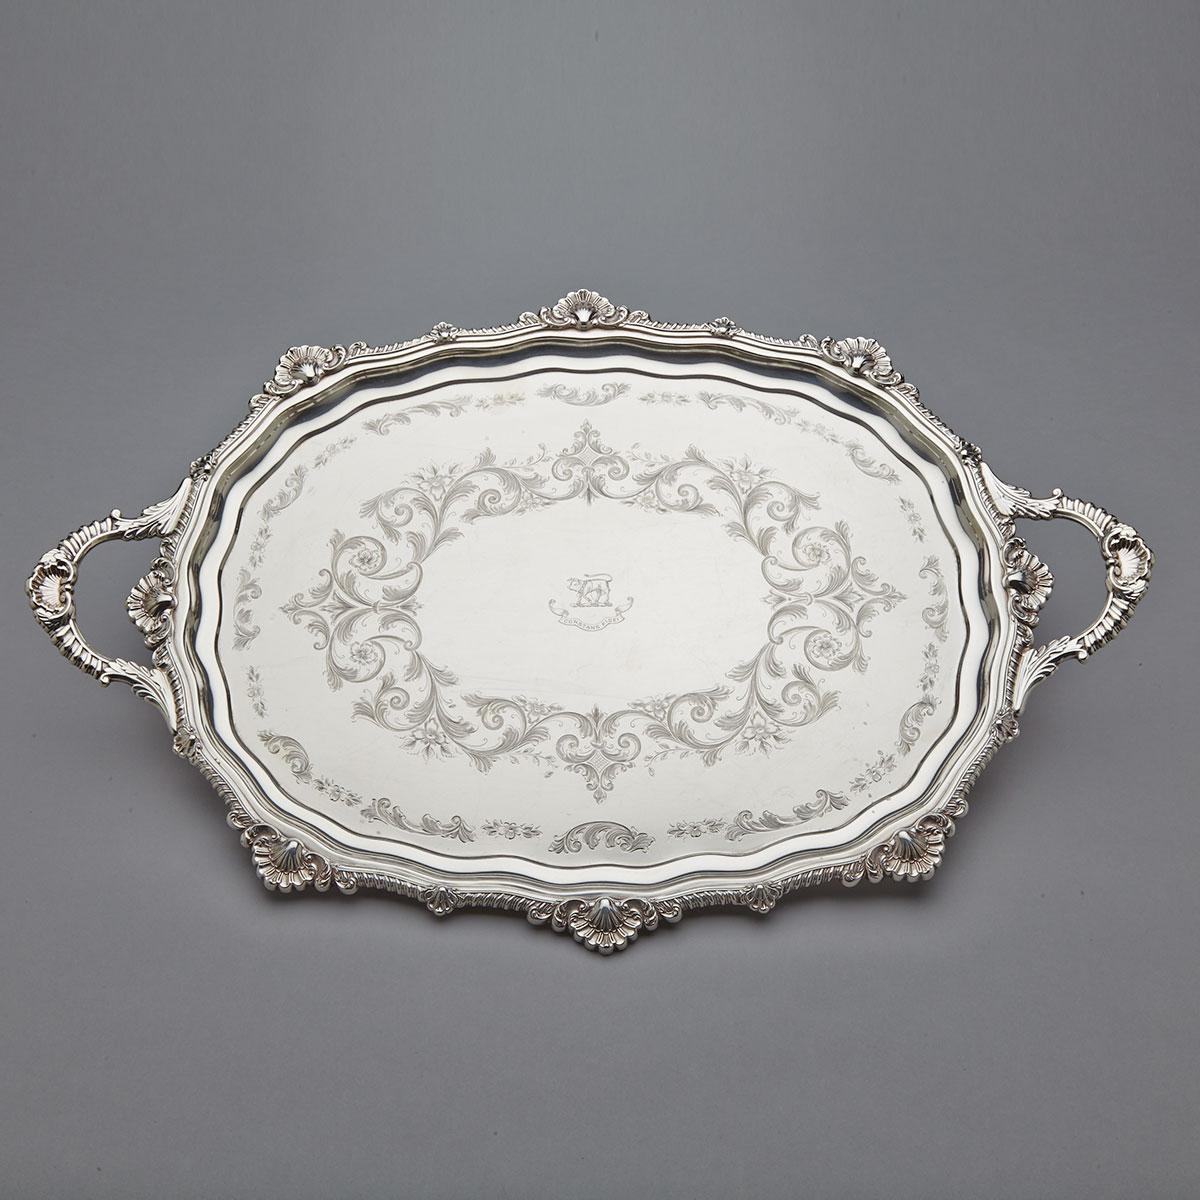 Canadian Silver Two-Handled Oval Serving Tray, Henry Birks & Sons, Montreal, Que., 1952